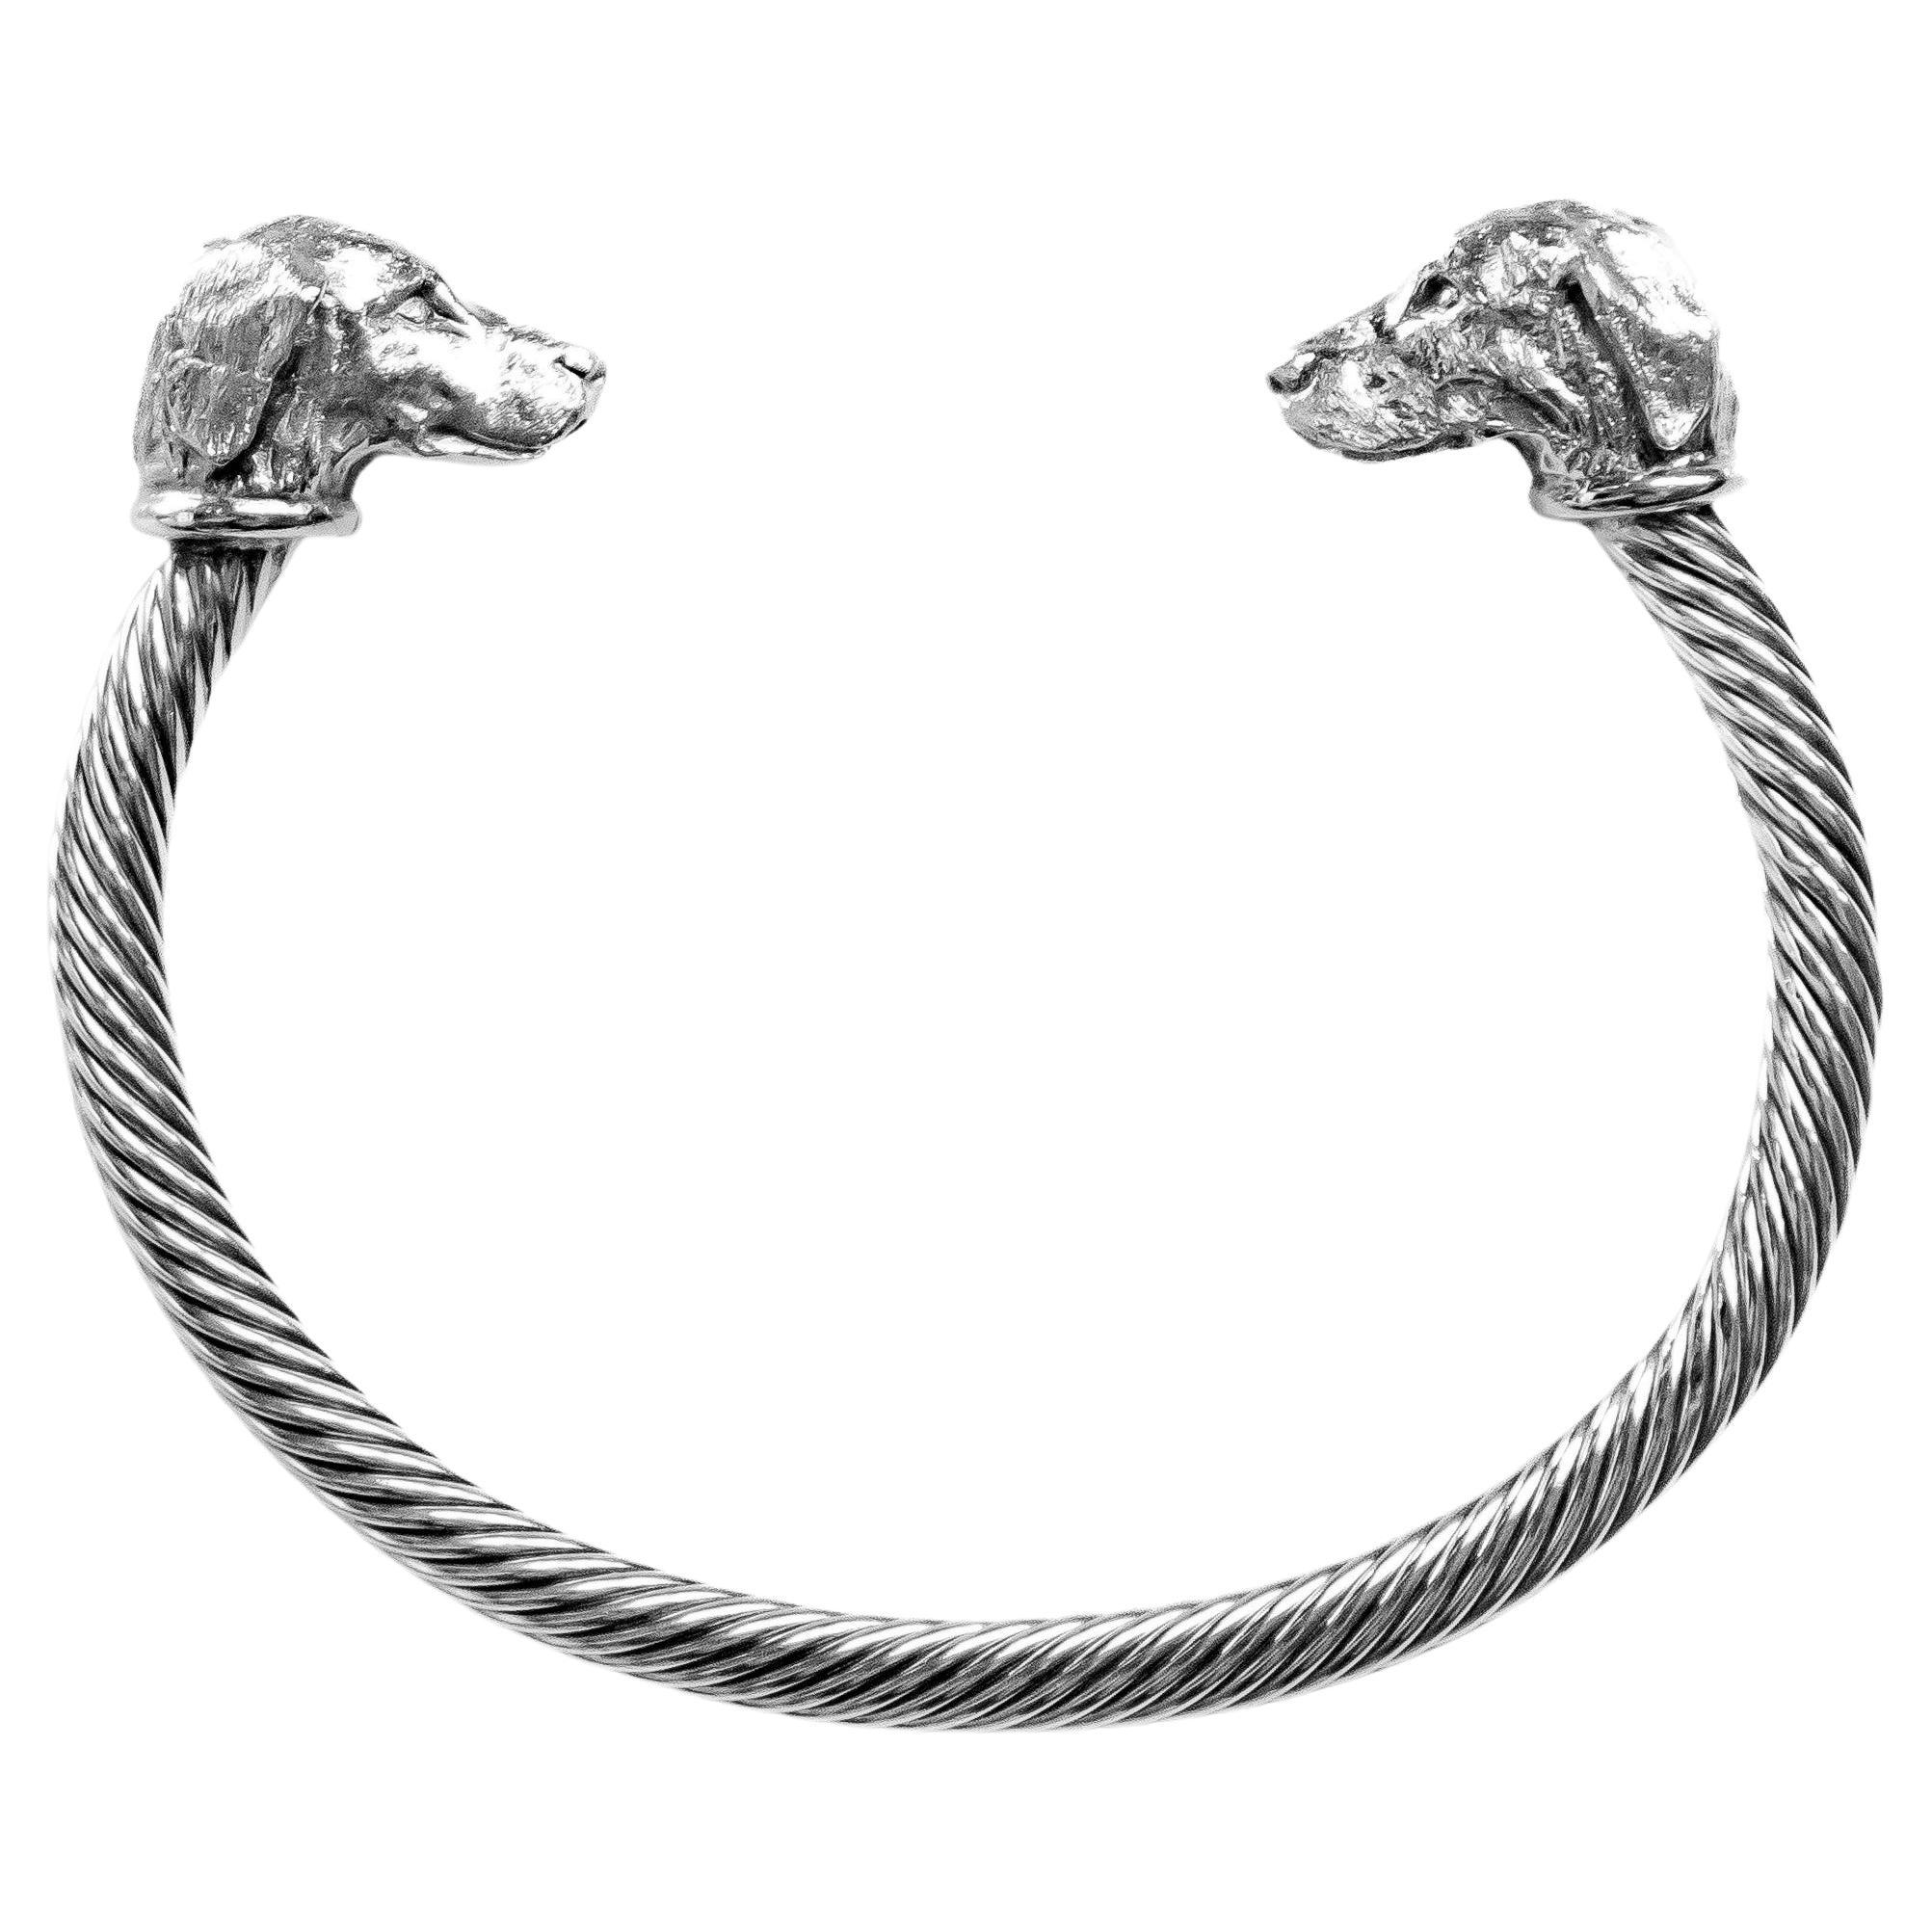 Paul Eaton Sculpted Labrador Retriever Heads on Sterling Silver Twisted Bangle For Sale